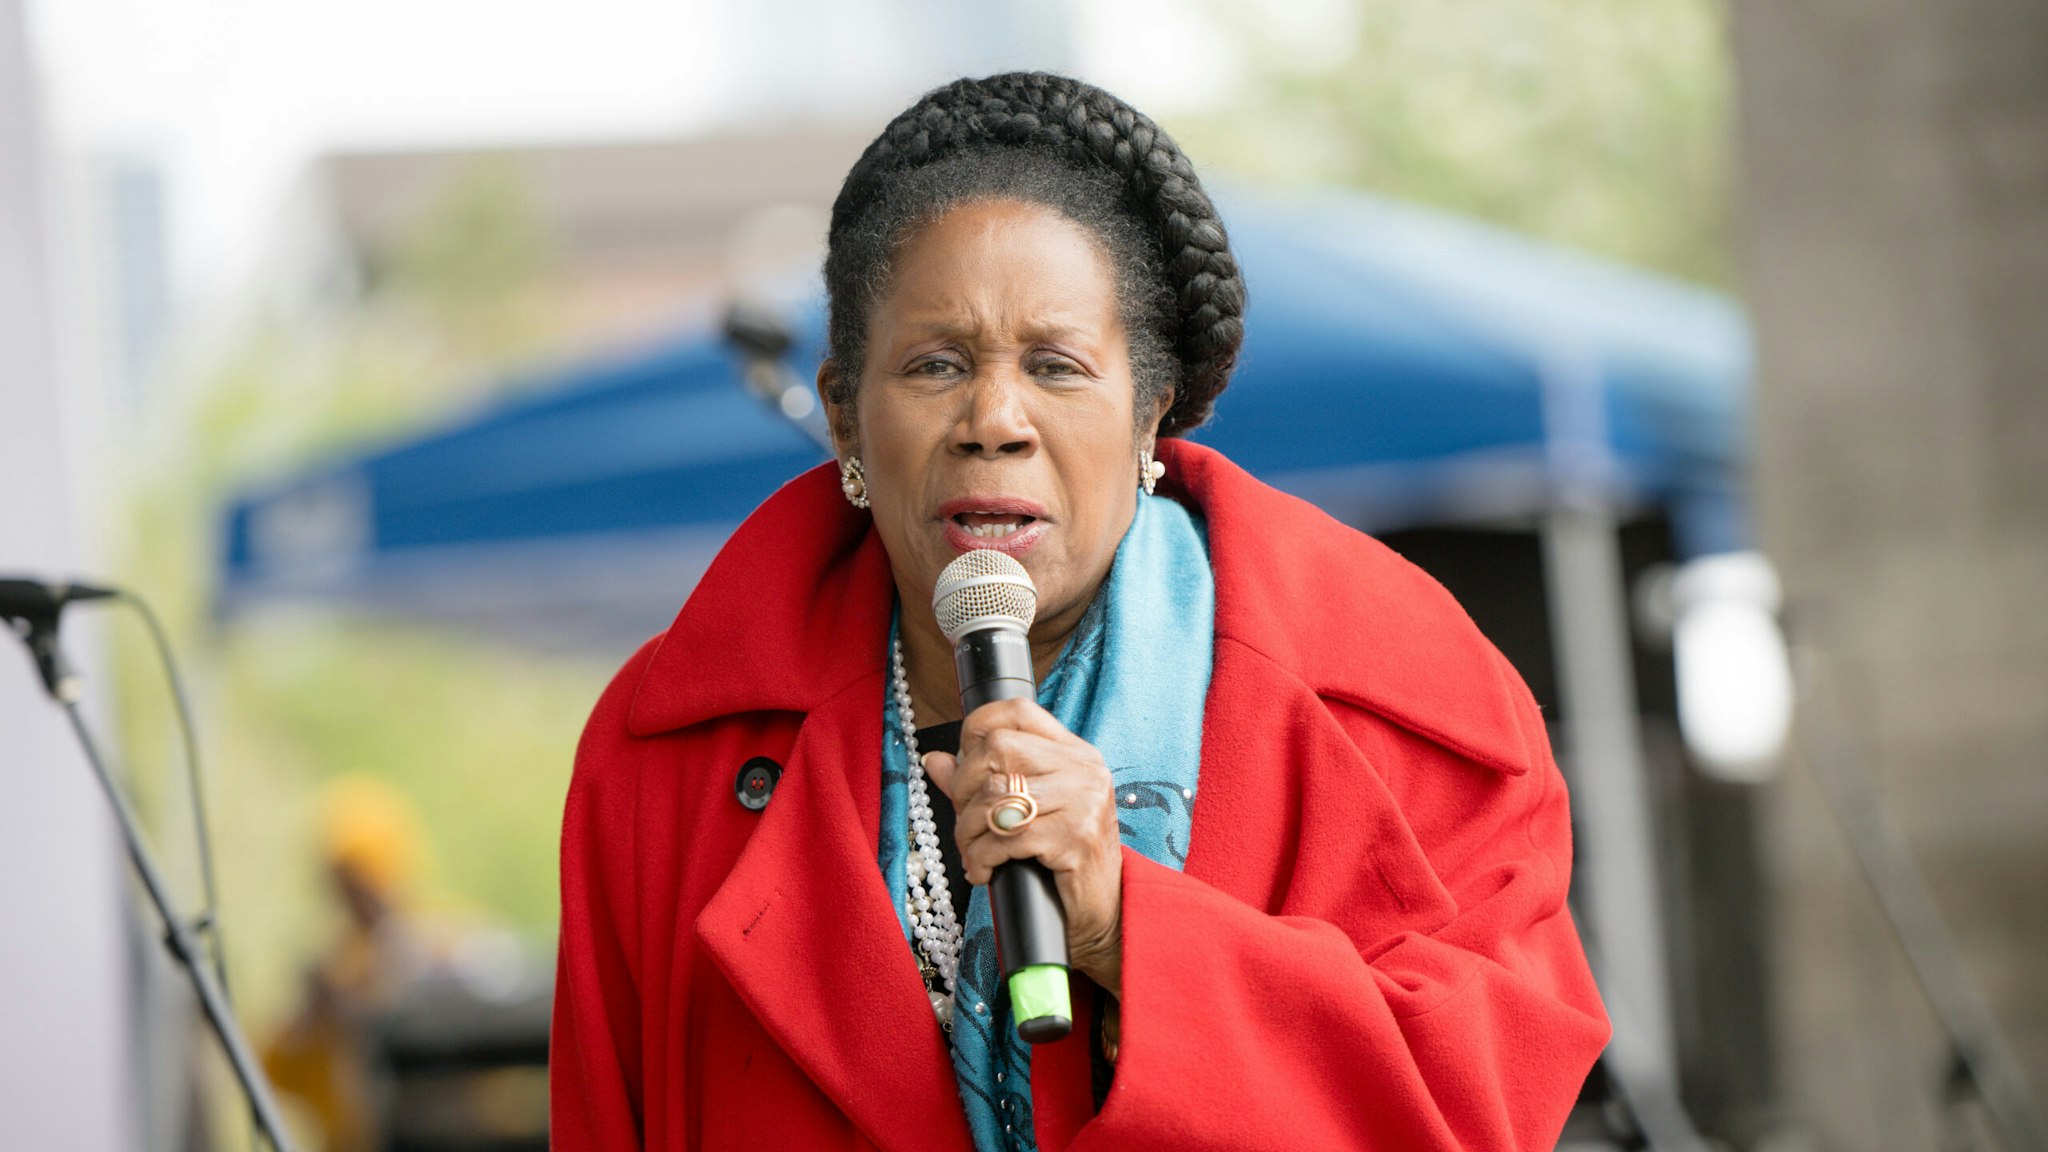 HOUSTON, TEXAS - MARCH 18: Sheila Jackson Lee attends the Praise In The Park concert at Buffalo Bayou Park on March 18, 2023 in Houston, Texas.